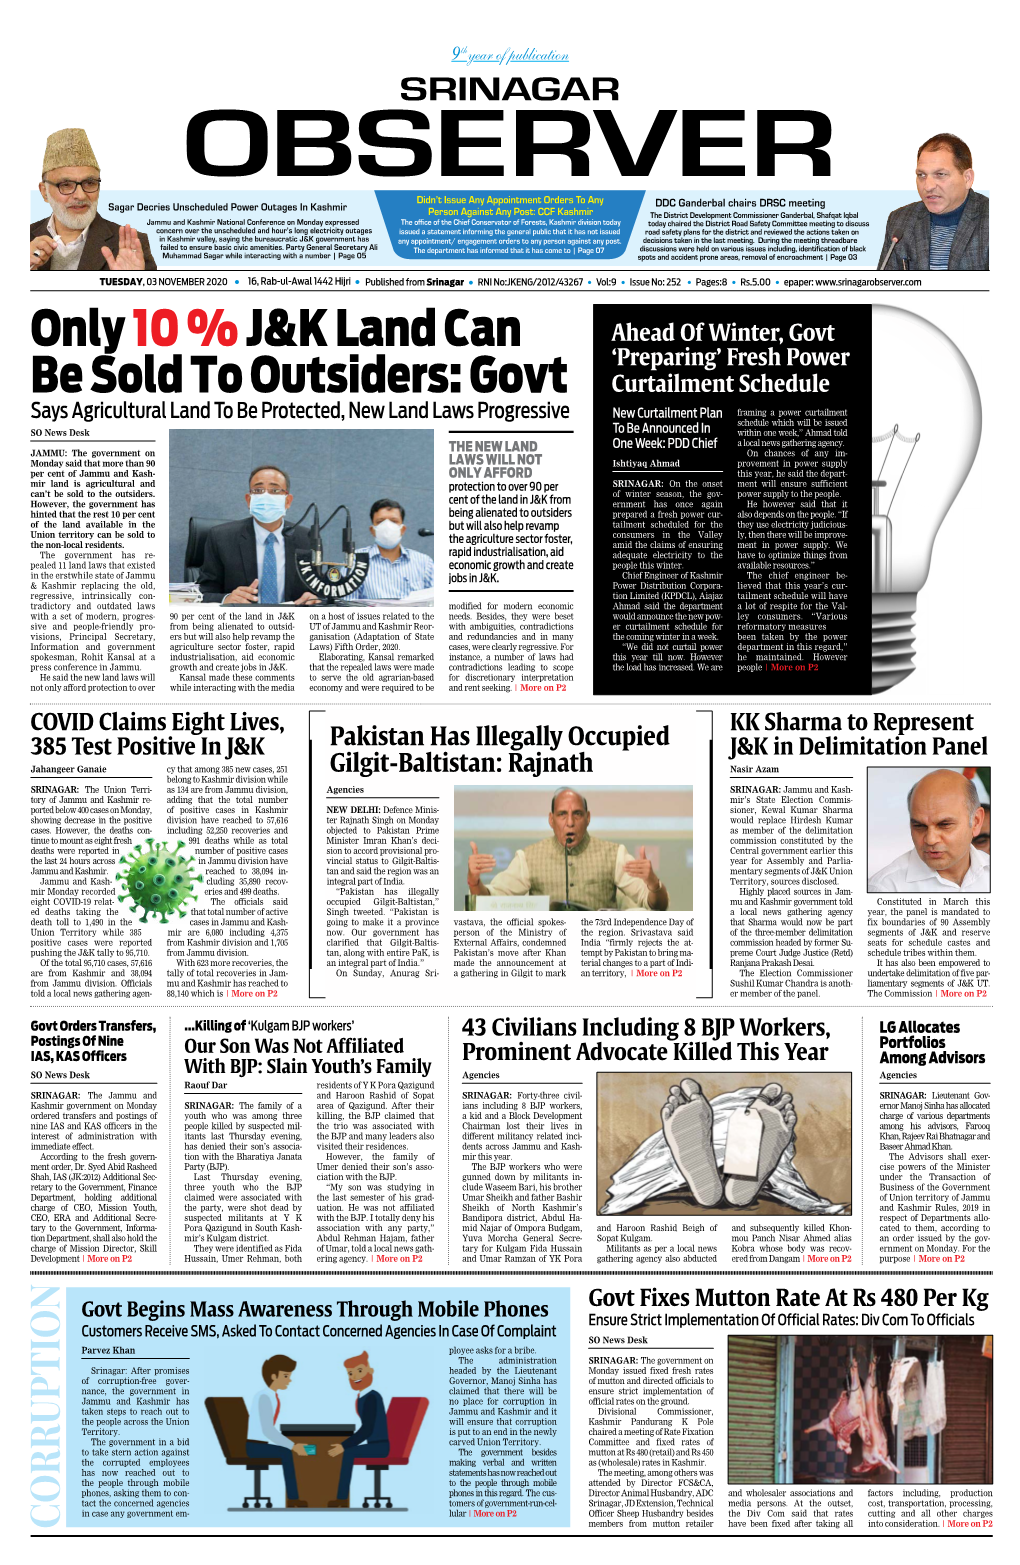 Only 10 %J&K Land Can Be Sold to Outsiders